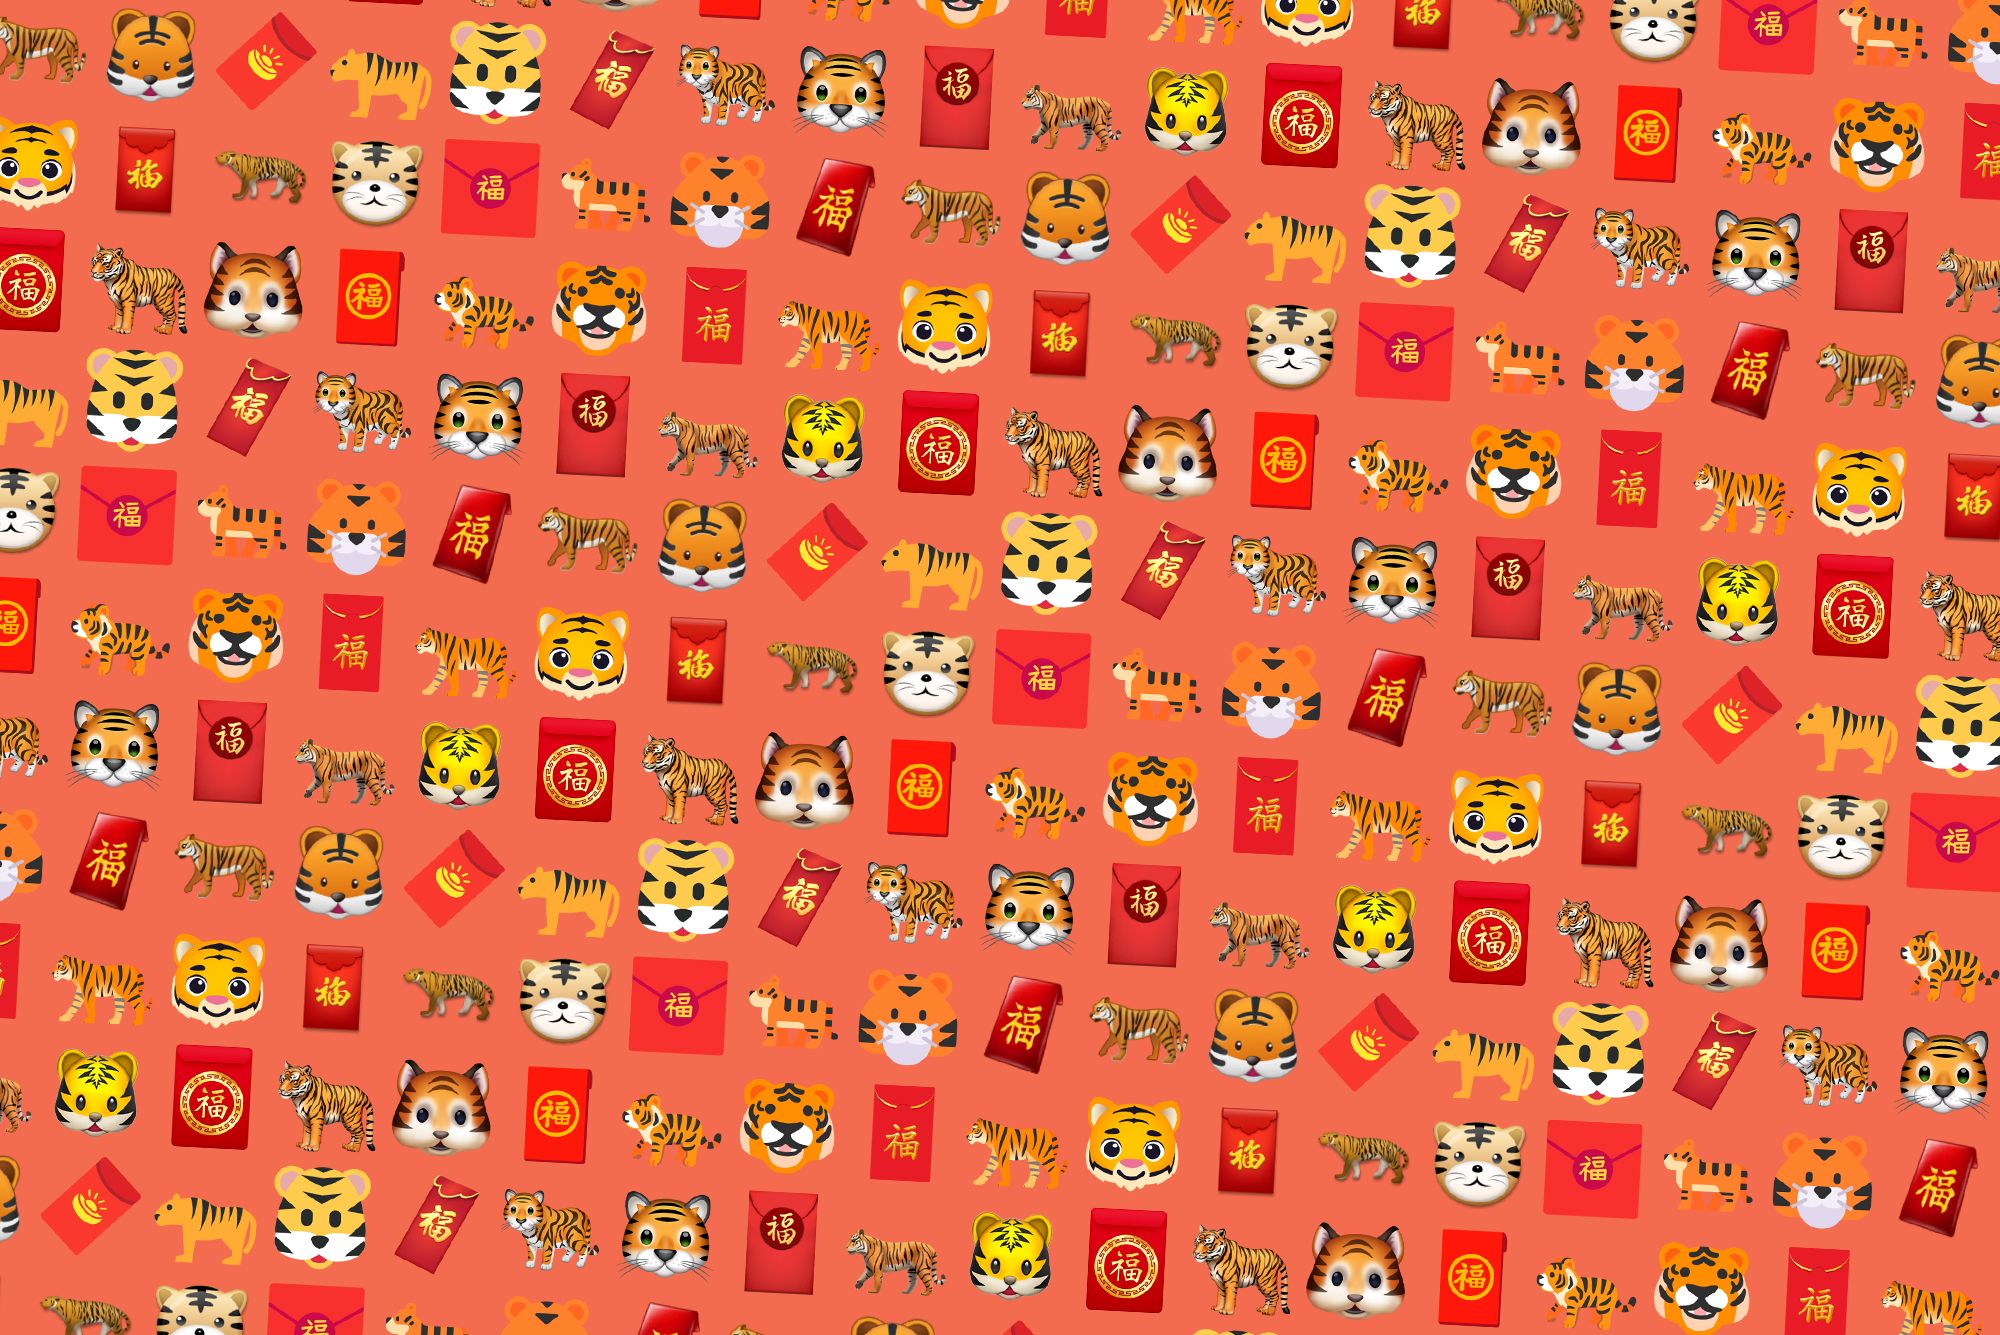 Year of the Tiger Emojis Roar into Life